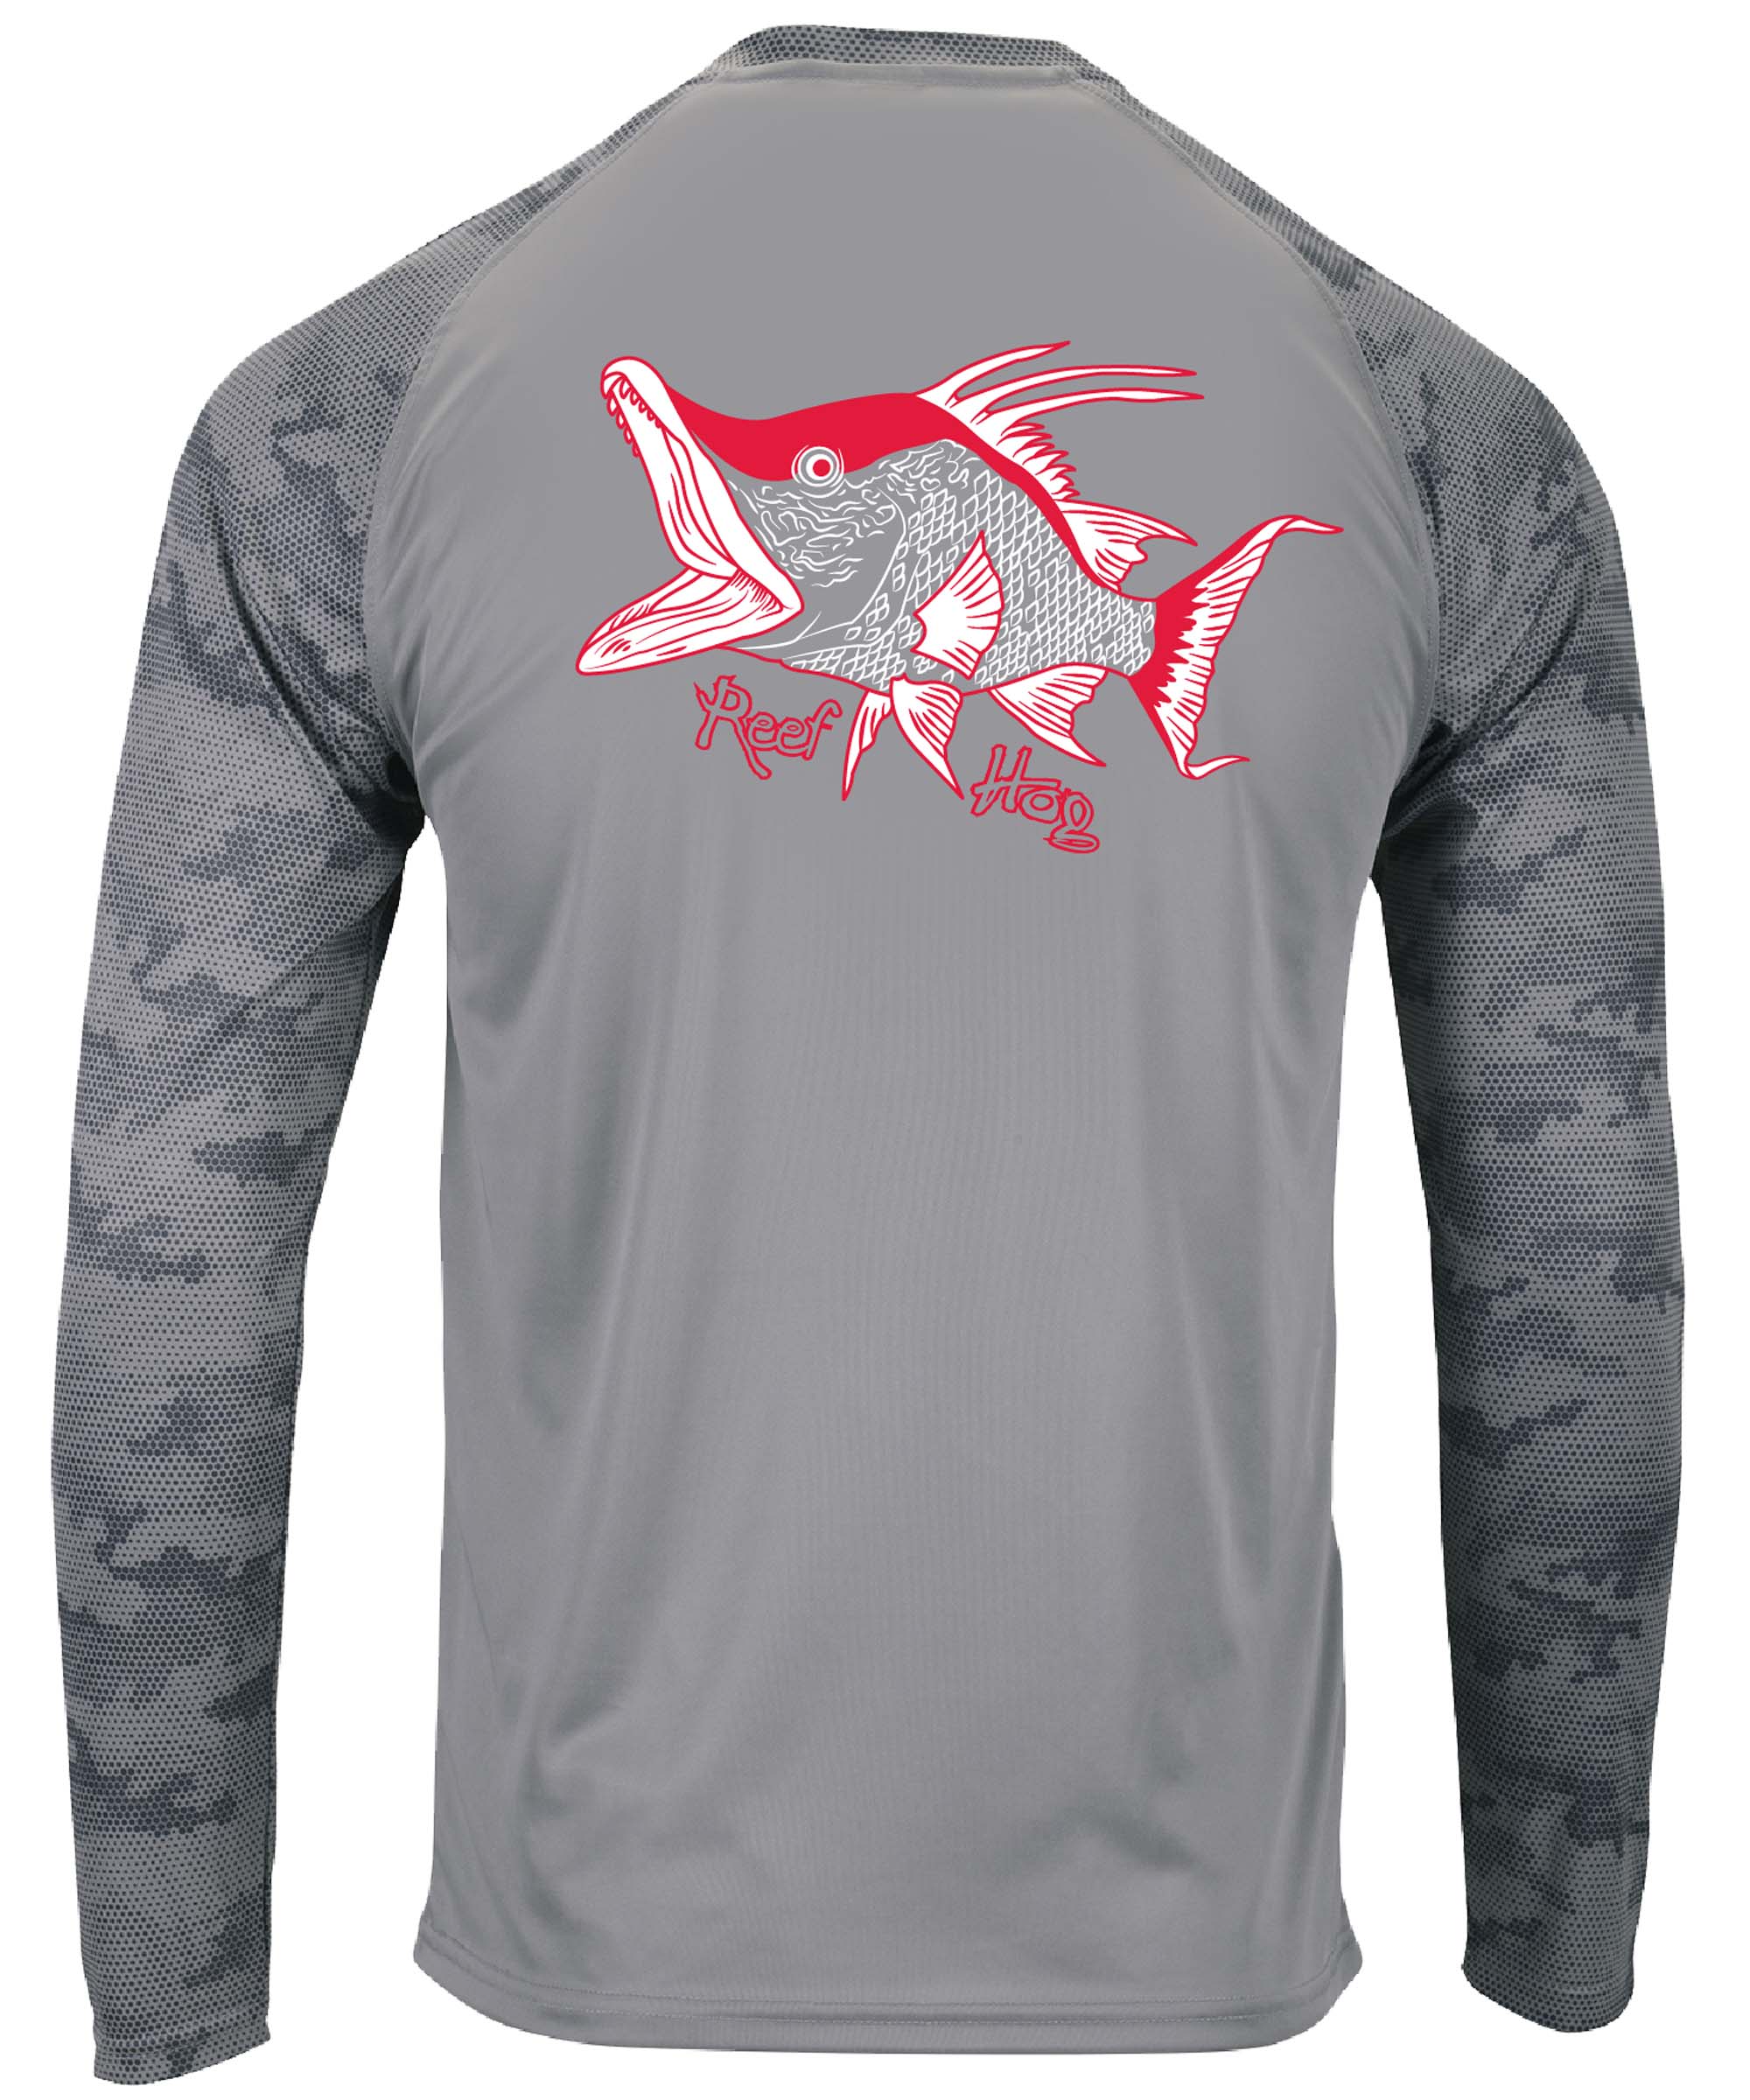 Purchases to Buy Dri Fit Fishing Shirts In San Diego, by Kill fishco